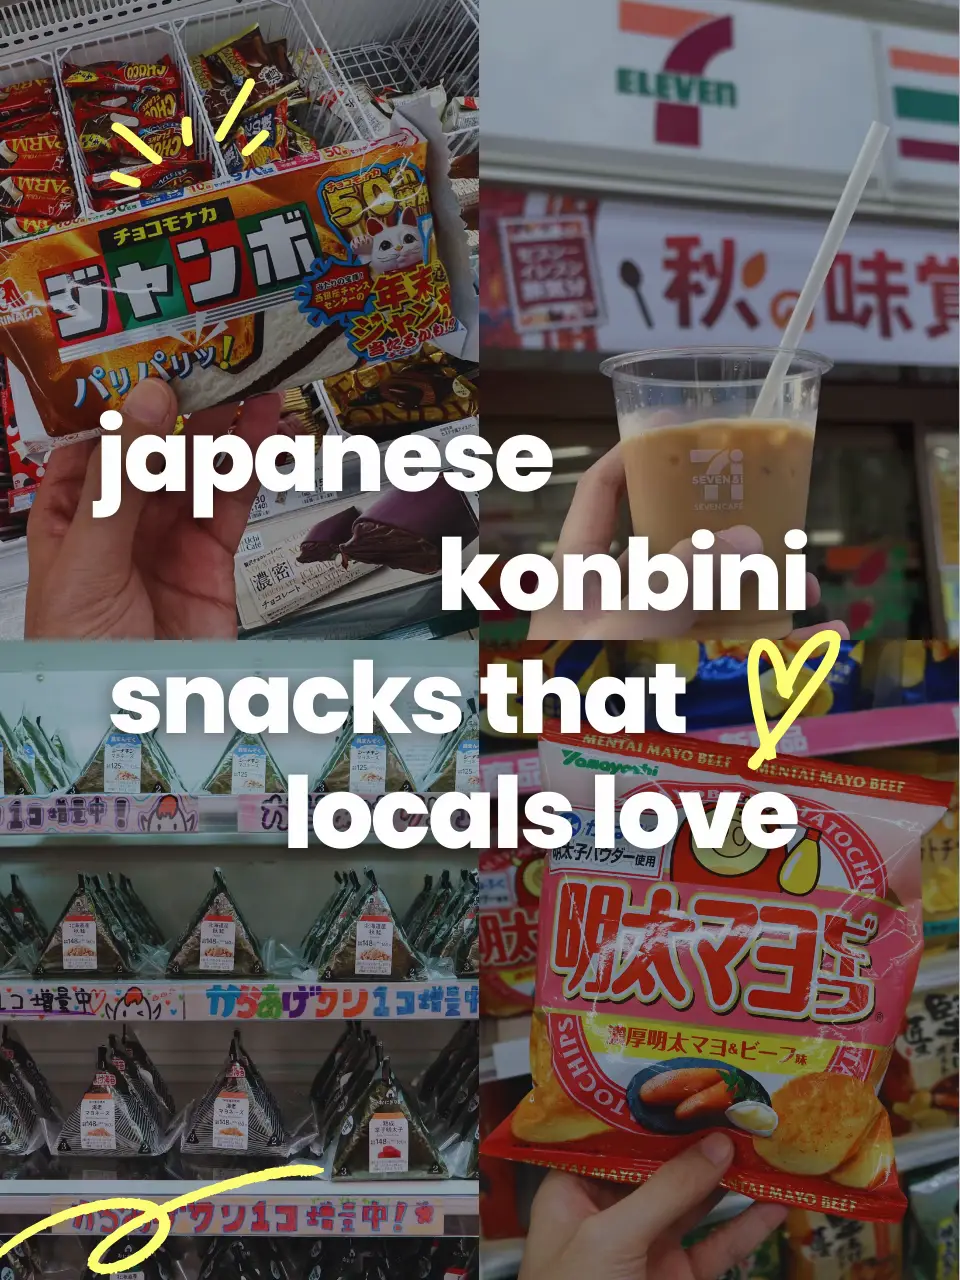 12 Cherry Blossom Snacks To Try From Japan Convenience Stores And Don  Quijote - Klook Travel Blog